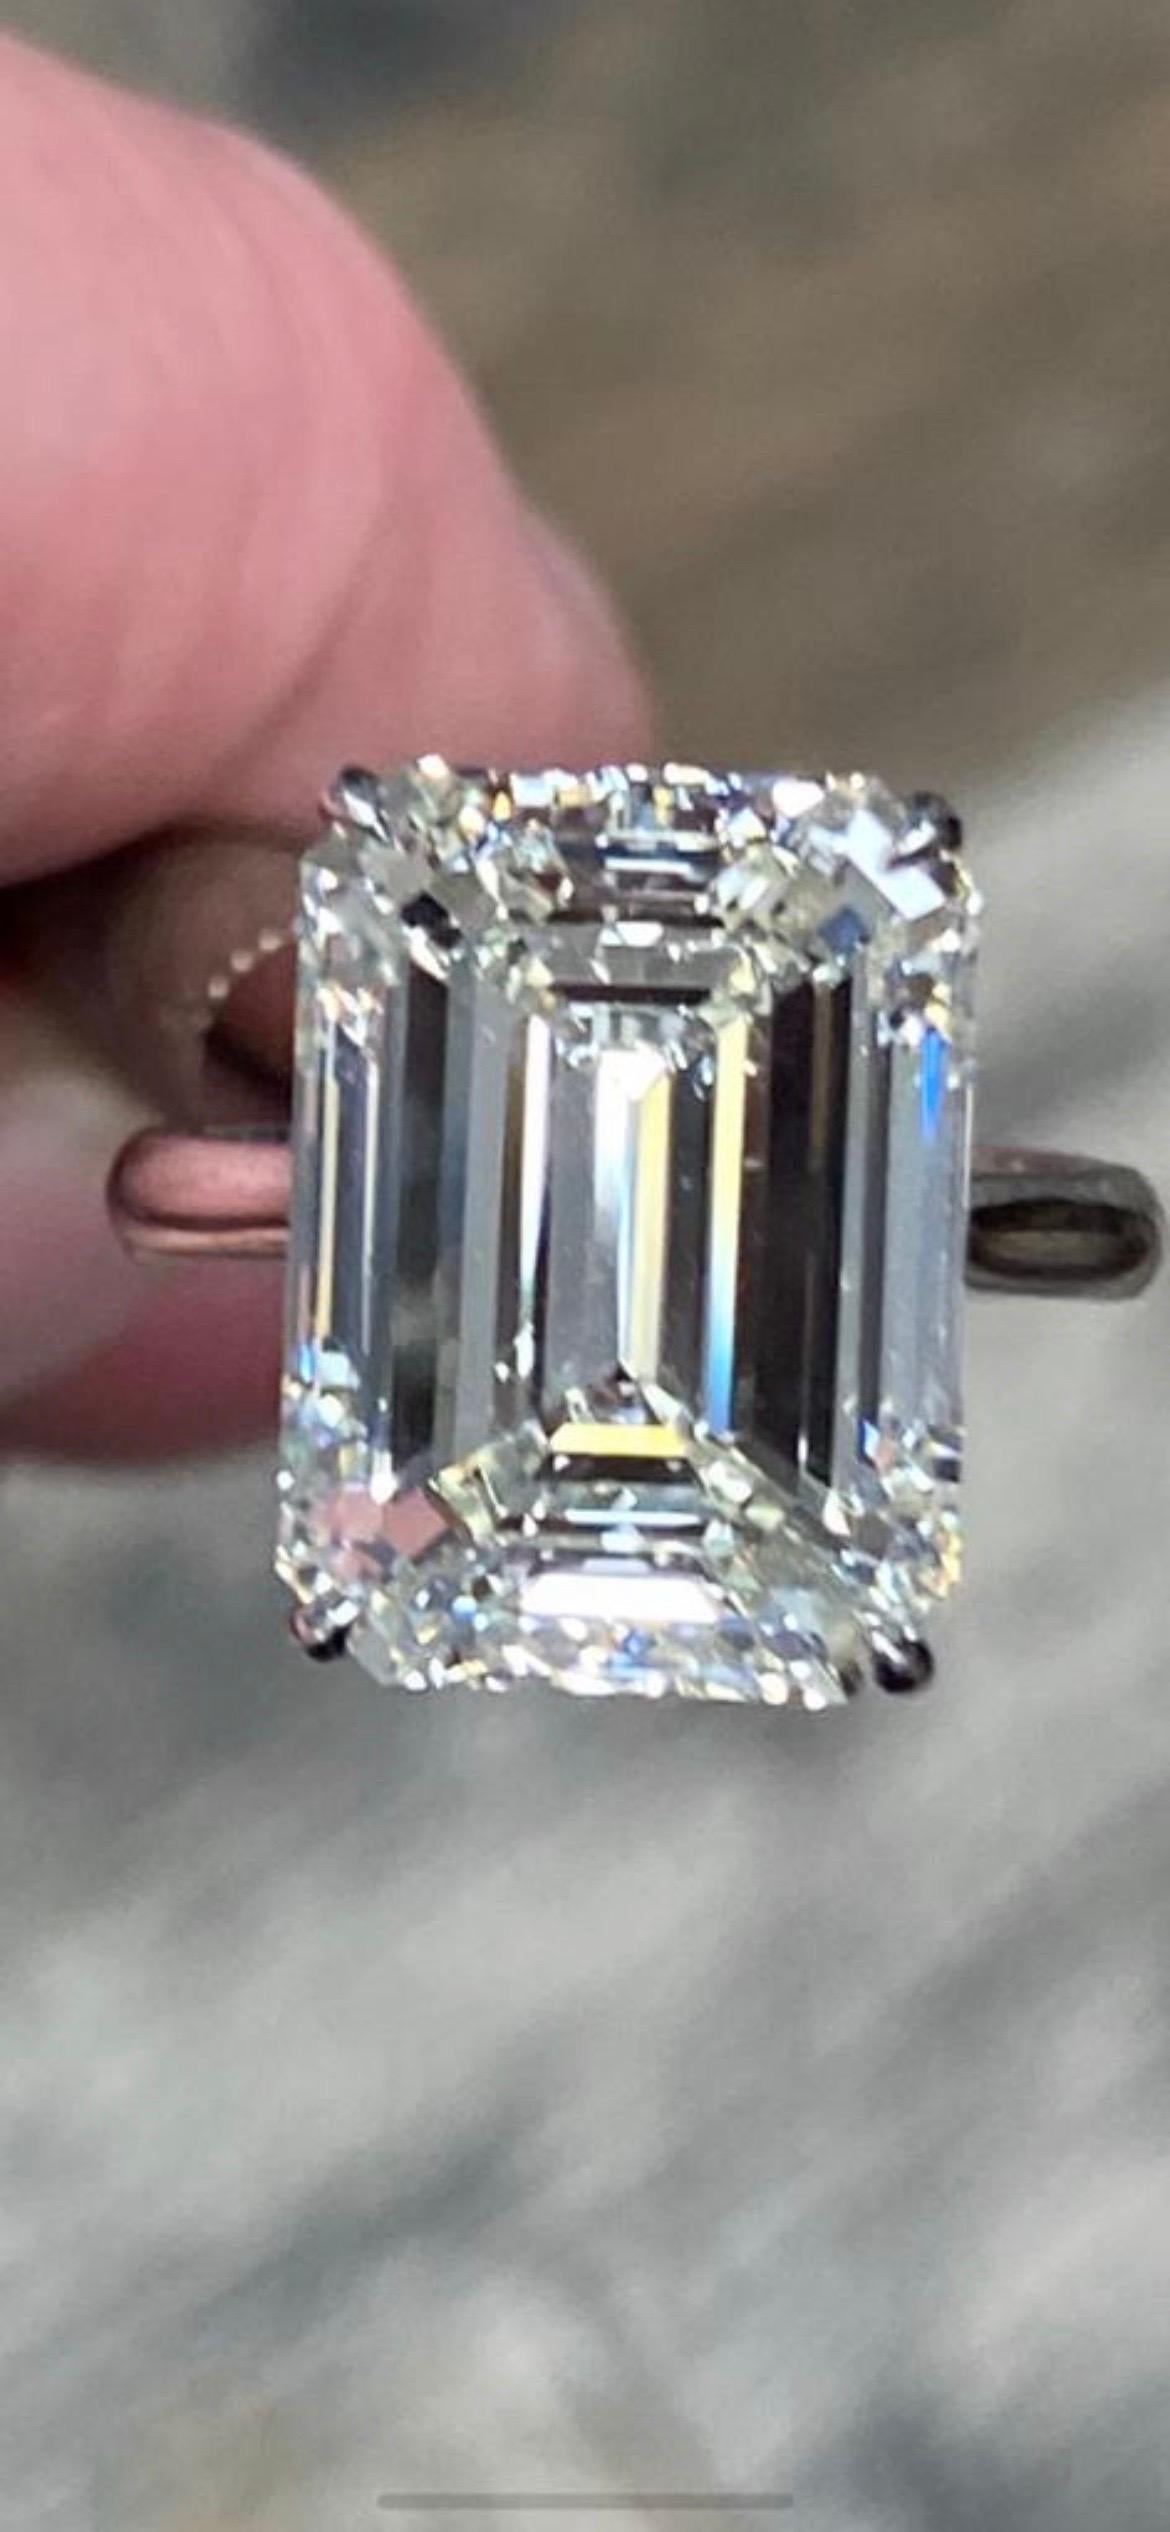 GIA CERTIFIED 11 CARAT EMERALD CUT DIAMOND RING 
Magnificent 11.32 Carat Emerald cut diamond ring.
“The Magic is in the Cut “
Truly a masterpiece and example of old world diamond cutting and shaping!
This beautifully cut gem is exceptional in its